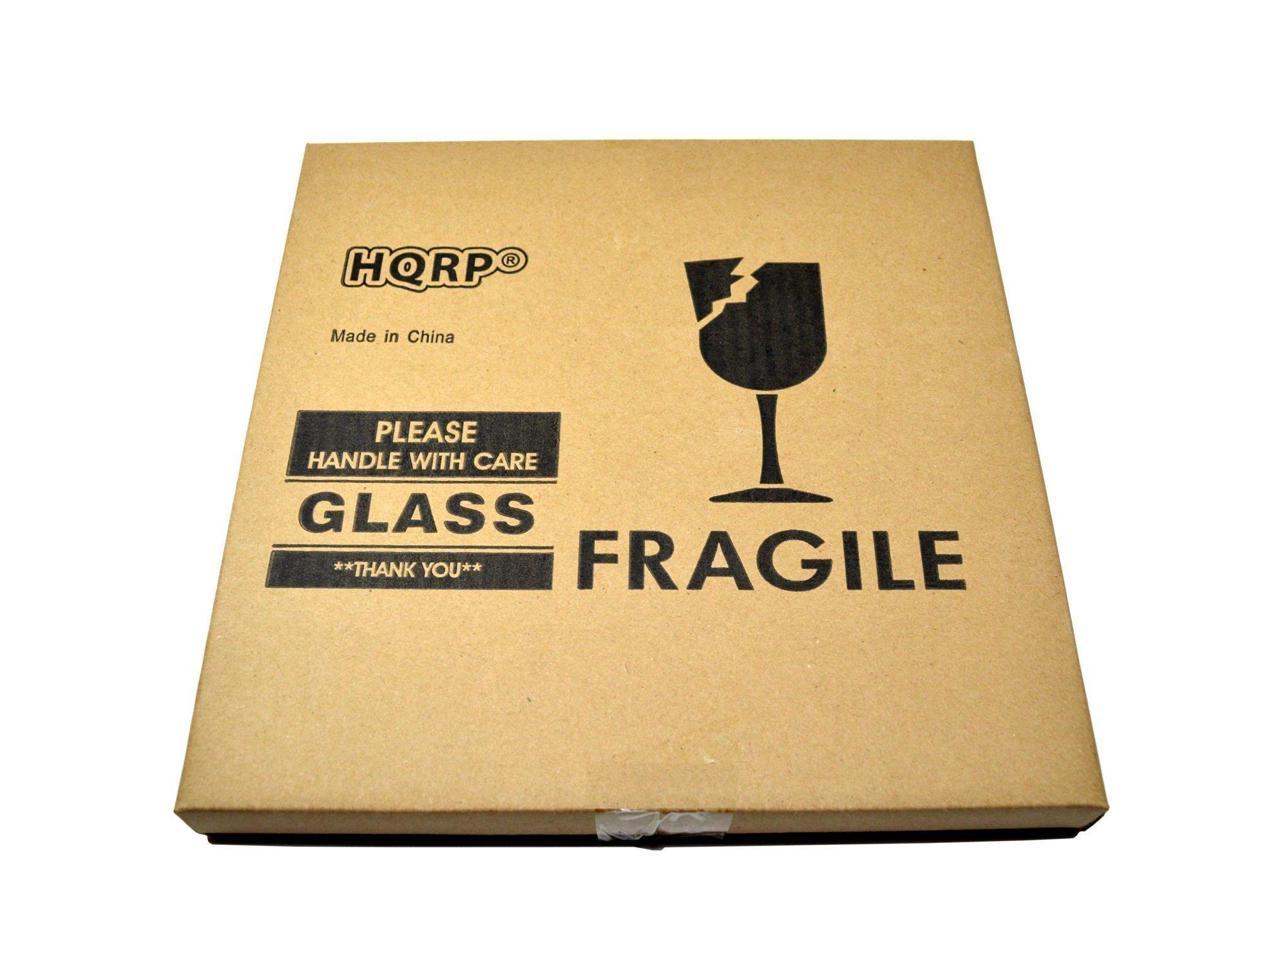 Nice wb49x10074 Hqrp 12 3 4 Inch Glass Turntable Tray For Kenmore 1b71961f 507049 2263672 721 62622200 80022700 80043700 80593400 8954690 Microwave Oven Cooking Plate Newegg Com